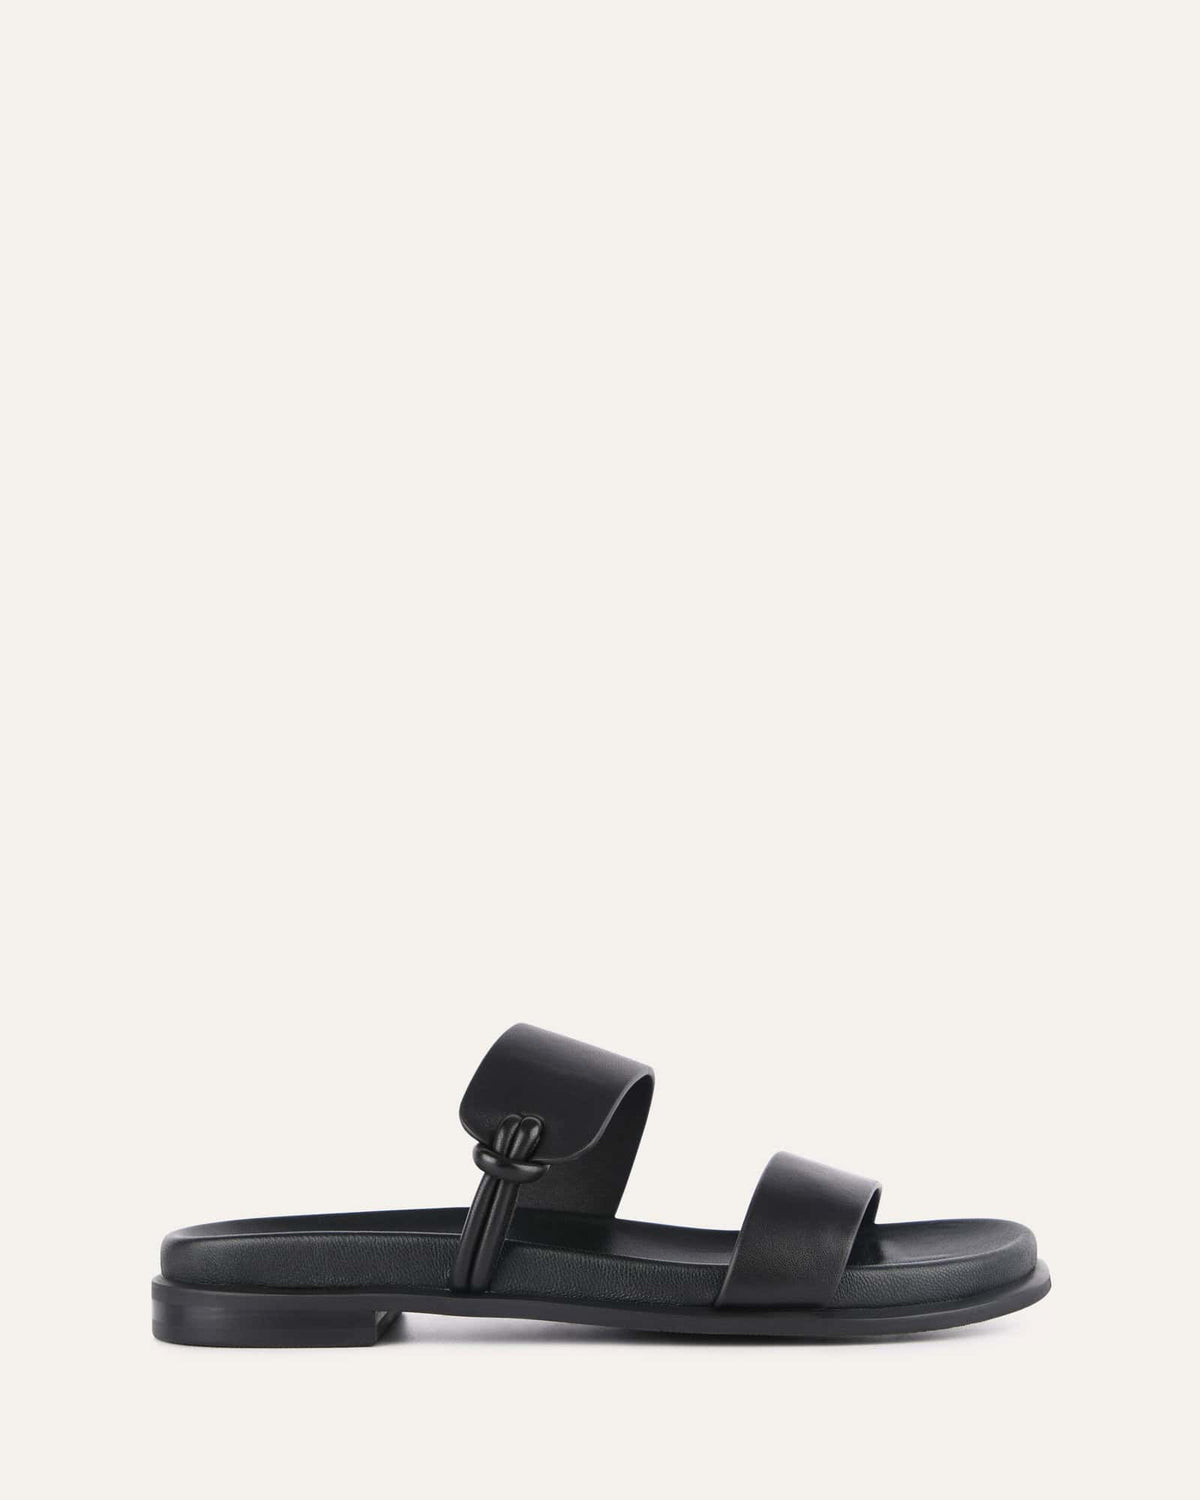 HAYES FLAT SANDALS BLACK LEATHER